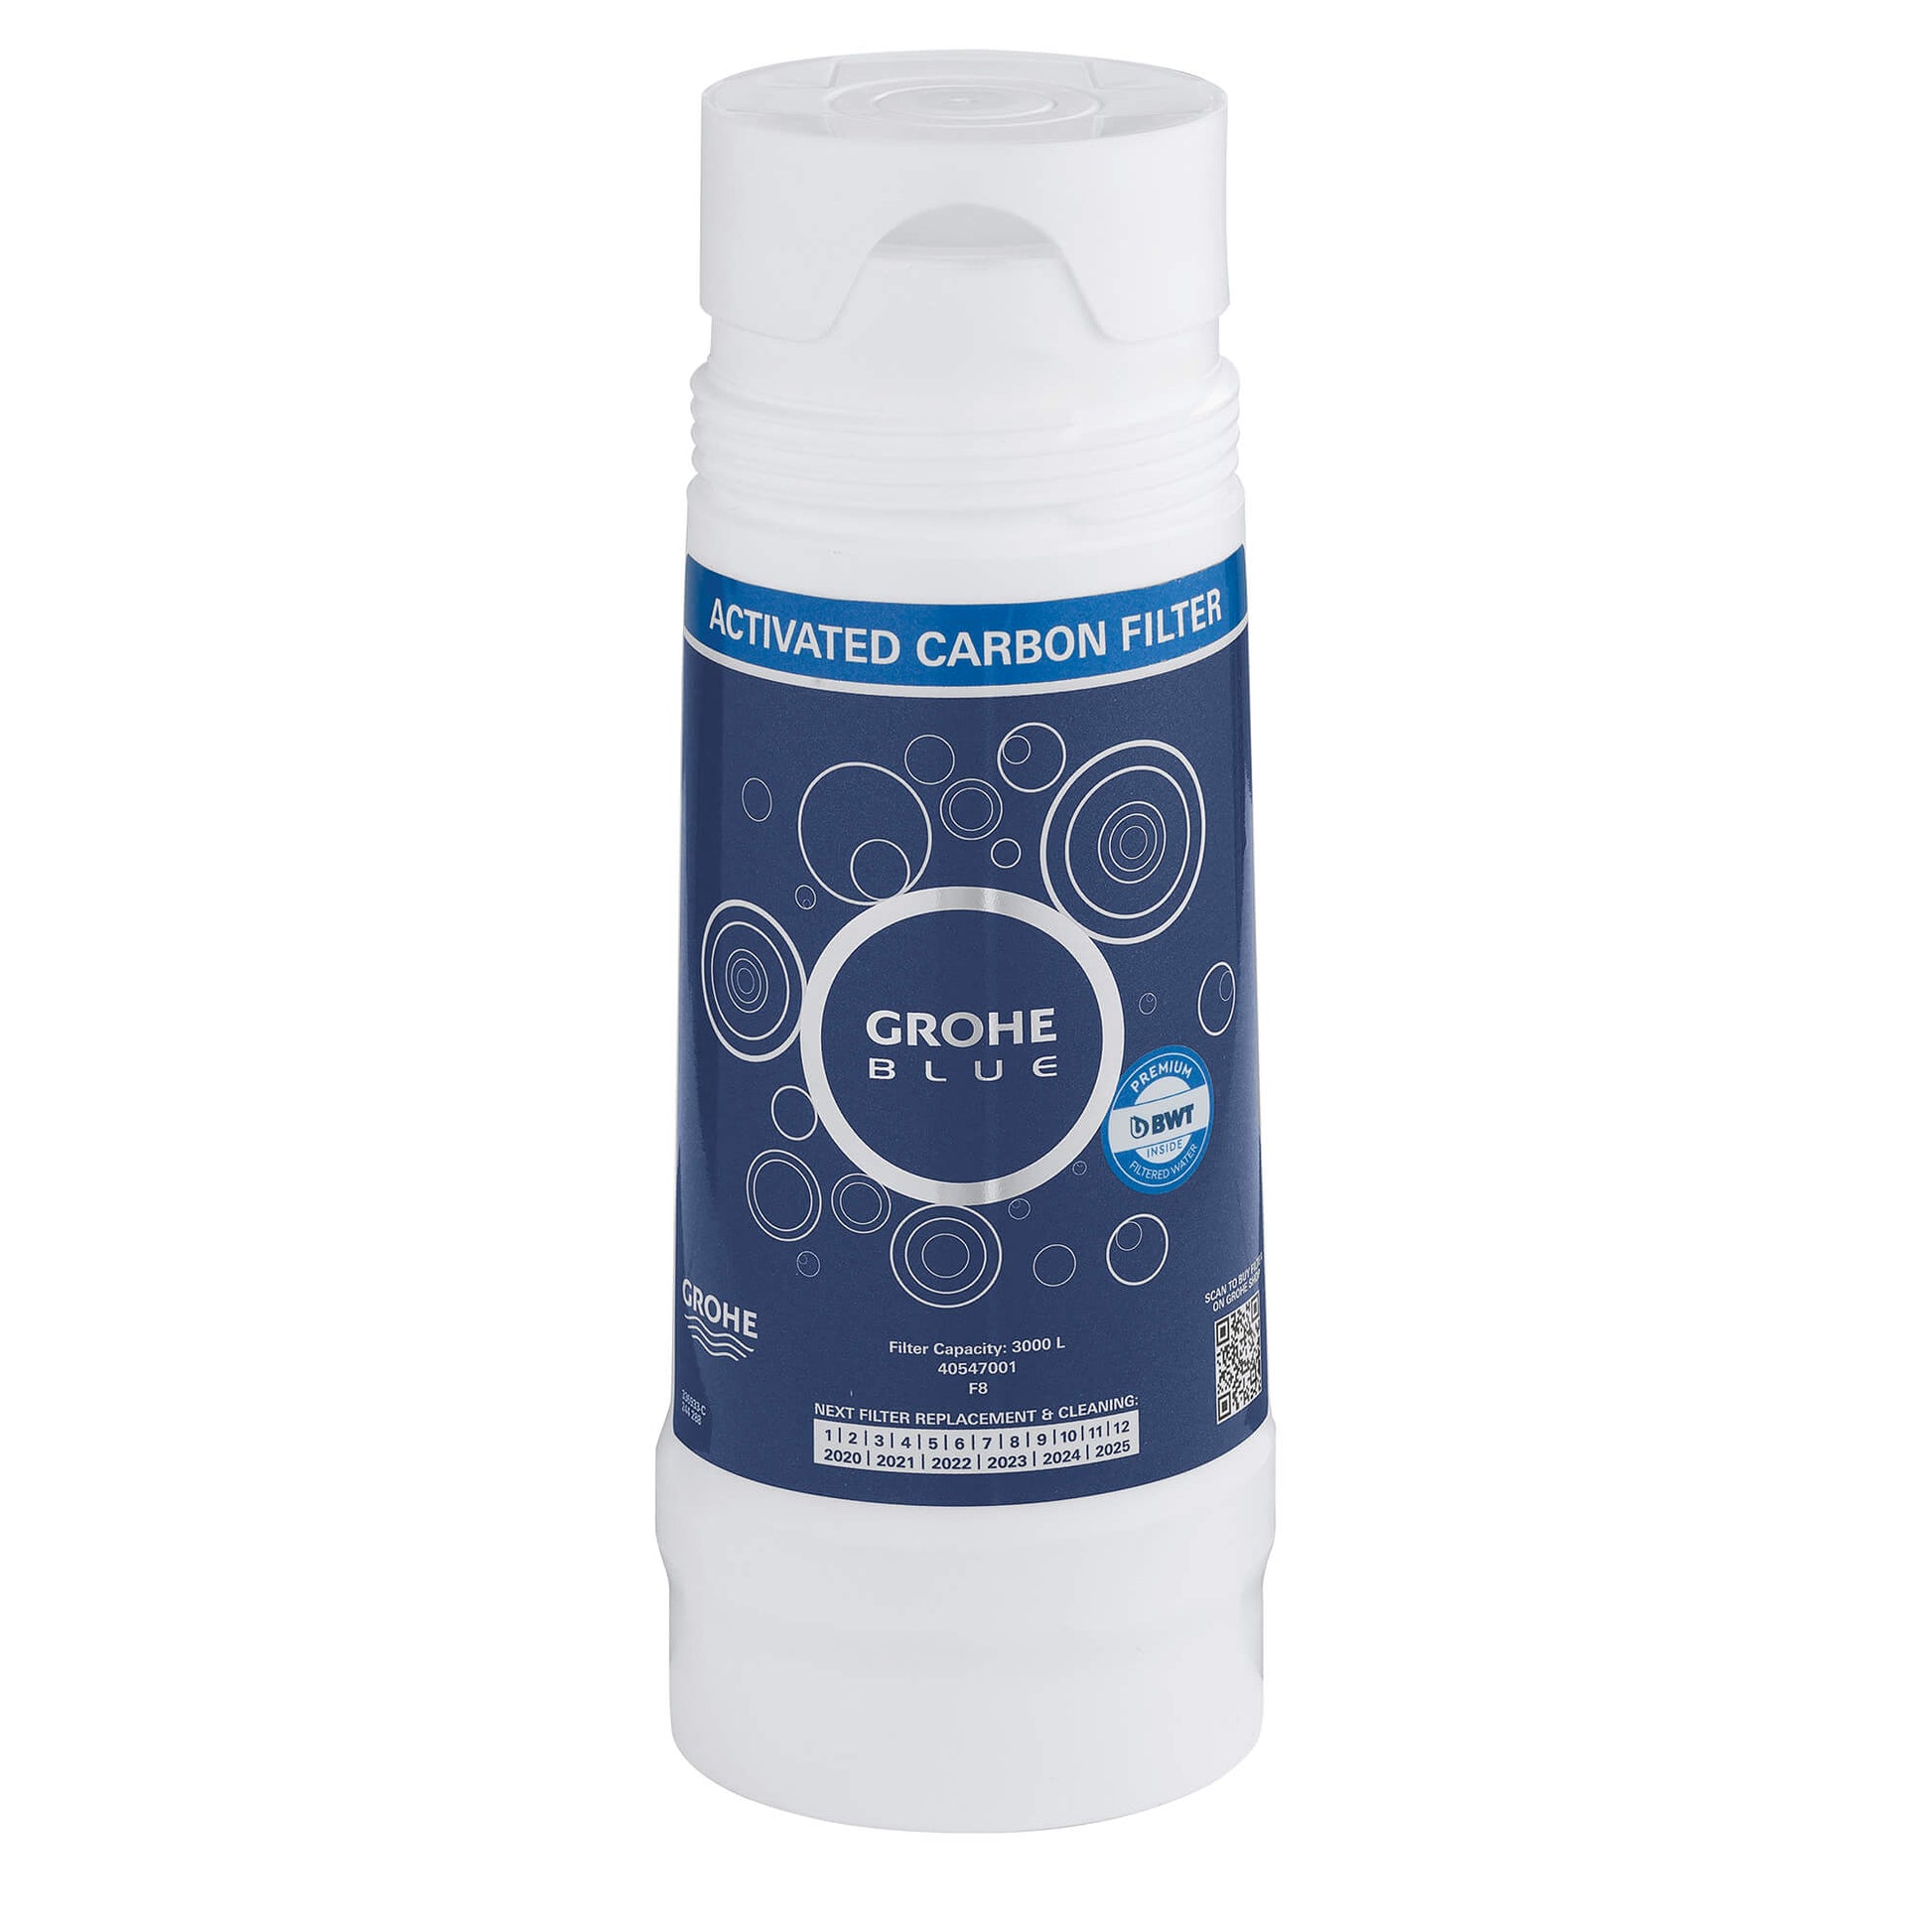 GROHE 40547001 Blue GROHE Blue Carbon Filter